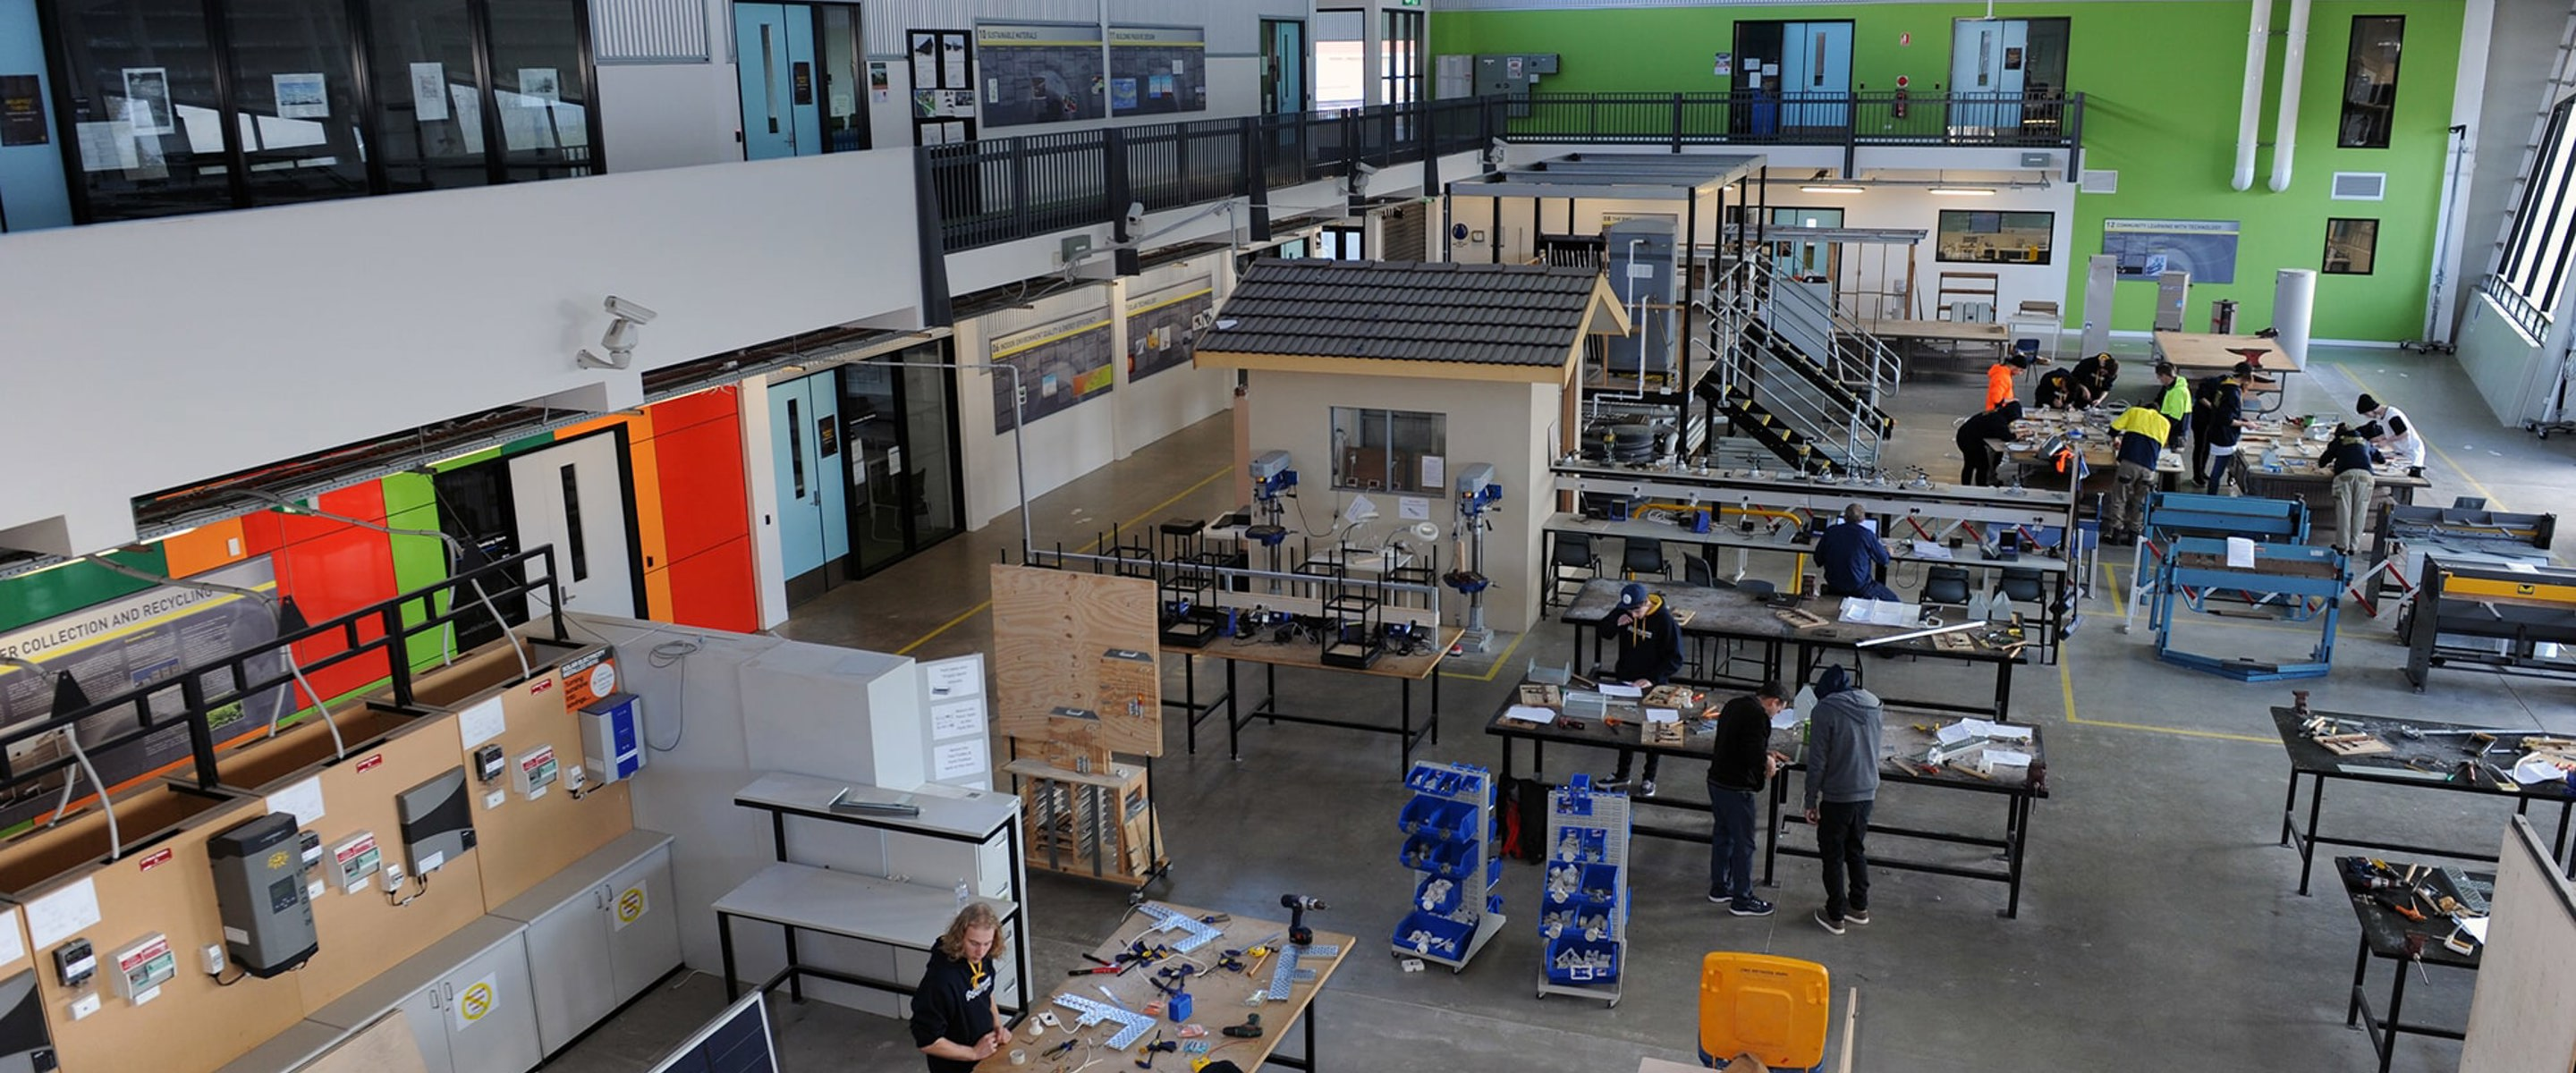 Electronics and Electrical students in electronics building at Melbourne Polytechnic